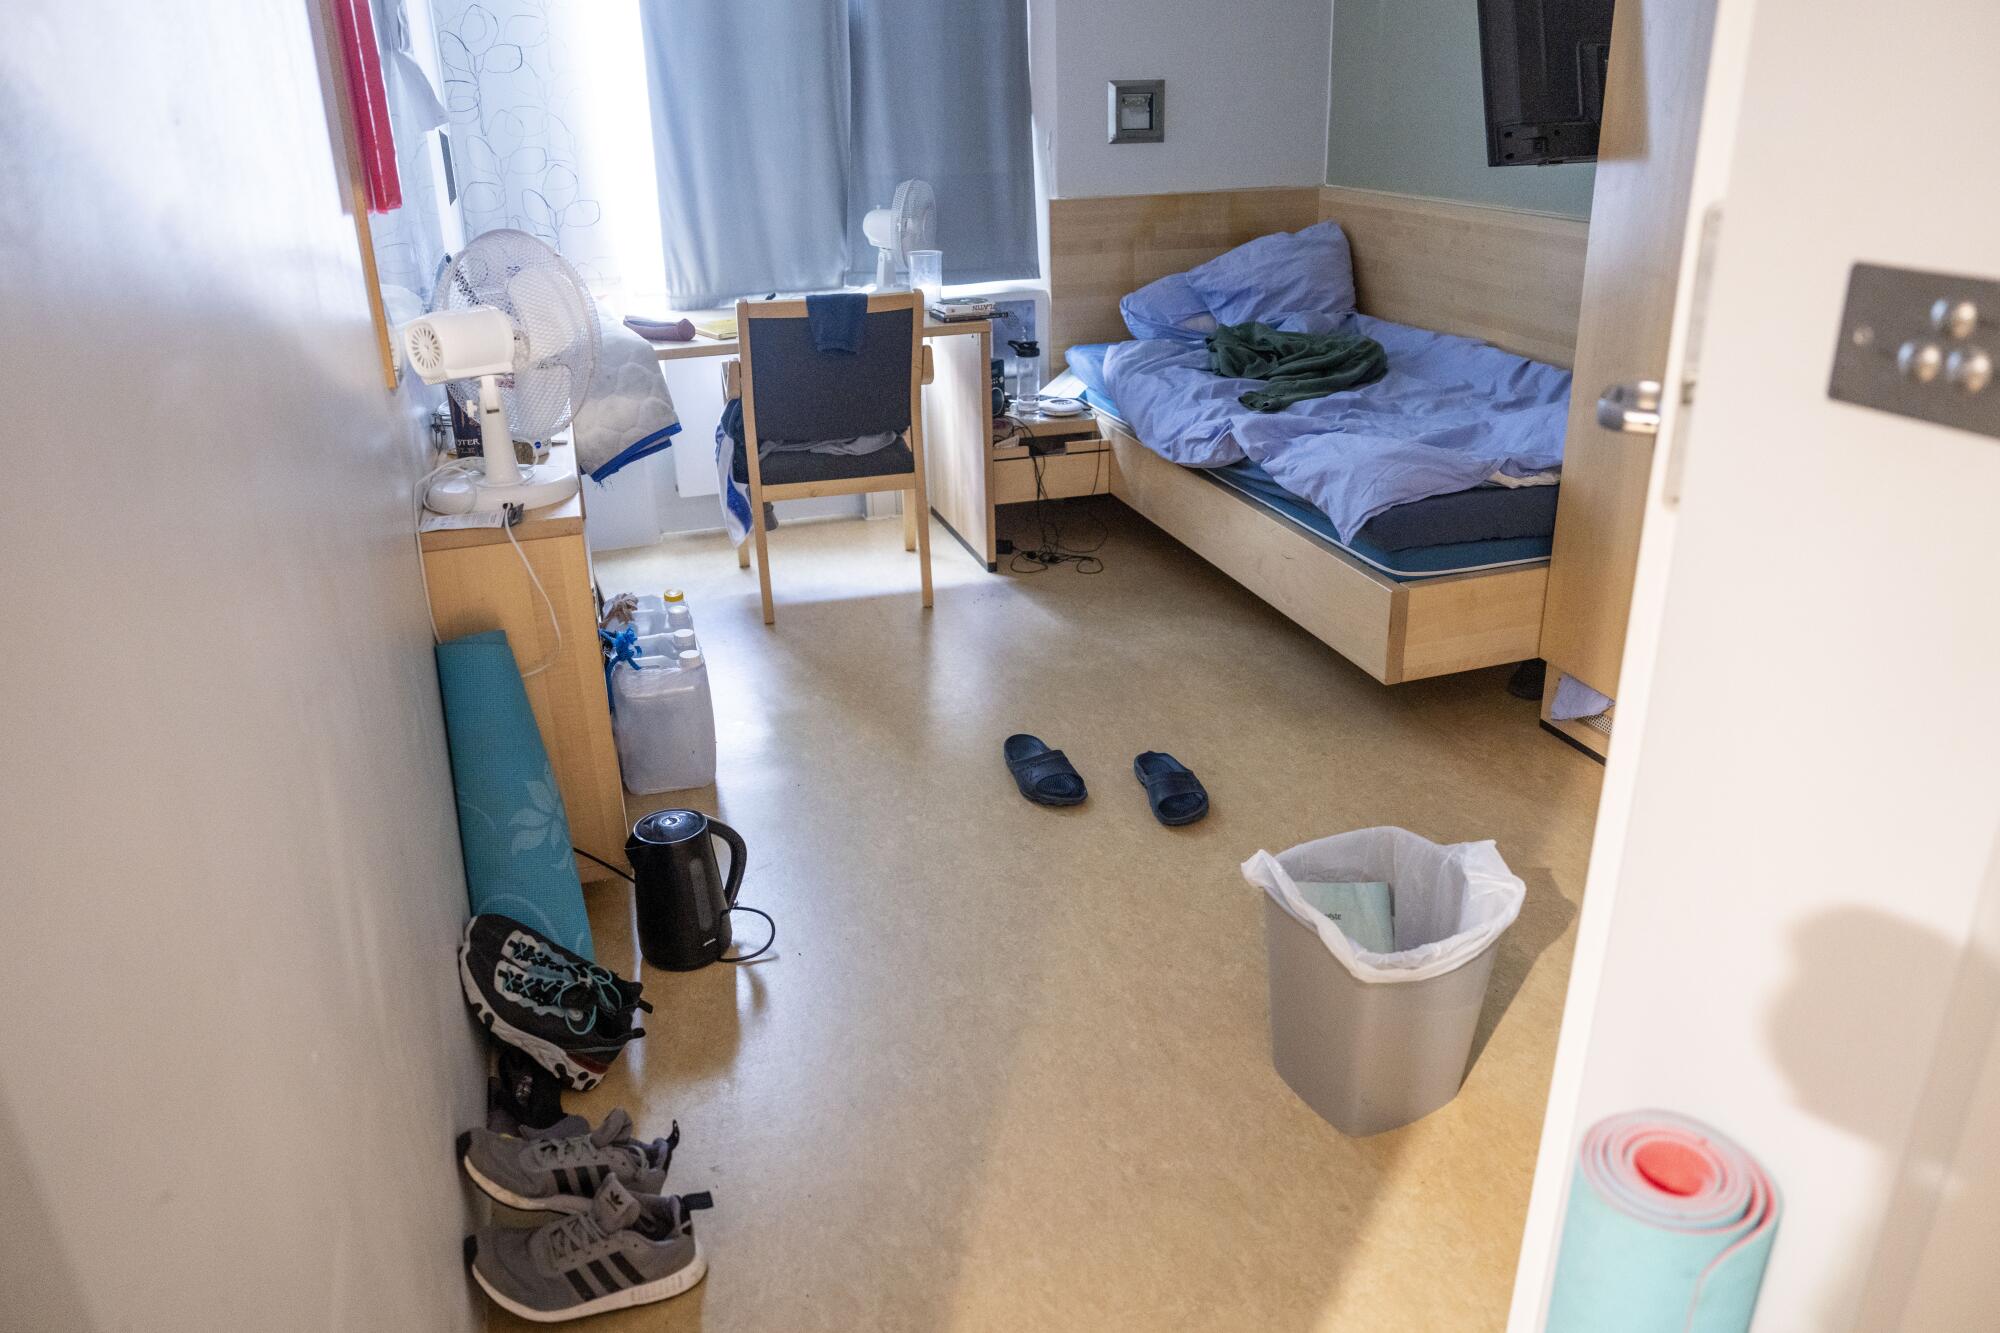 A cell inside Halden prison in Norway includes a window and a private bathroom. 